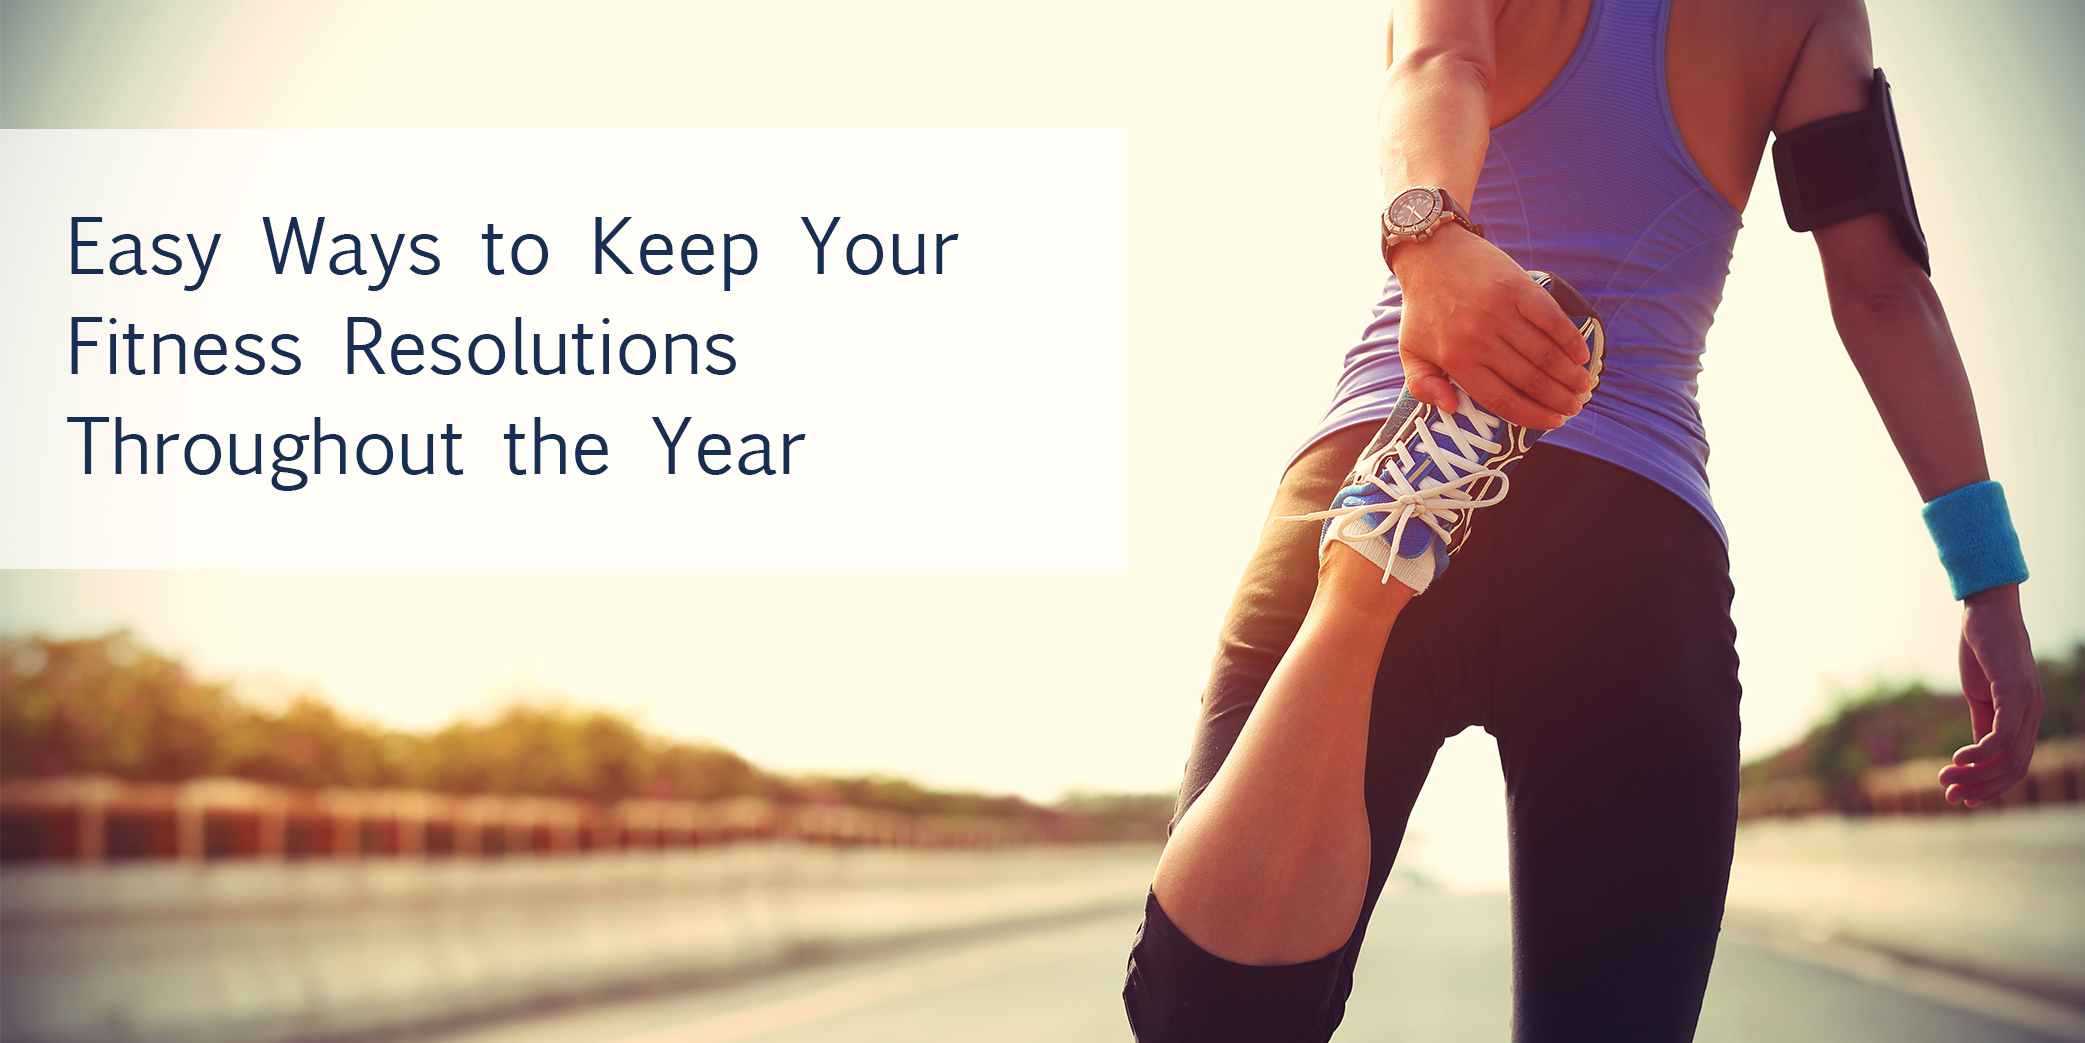 Easy Ways to Keep your Fitness Resolutions throughout the Year